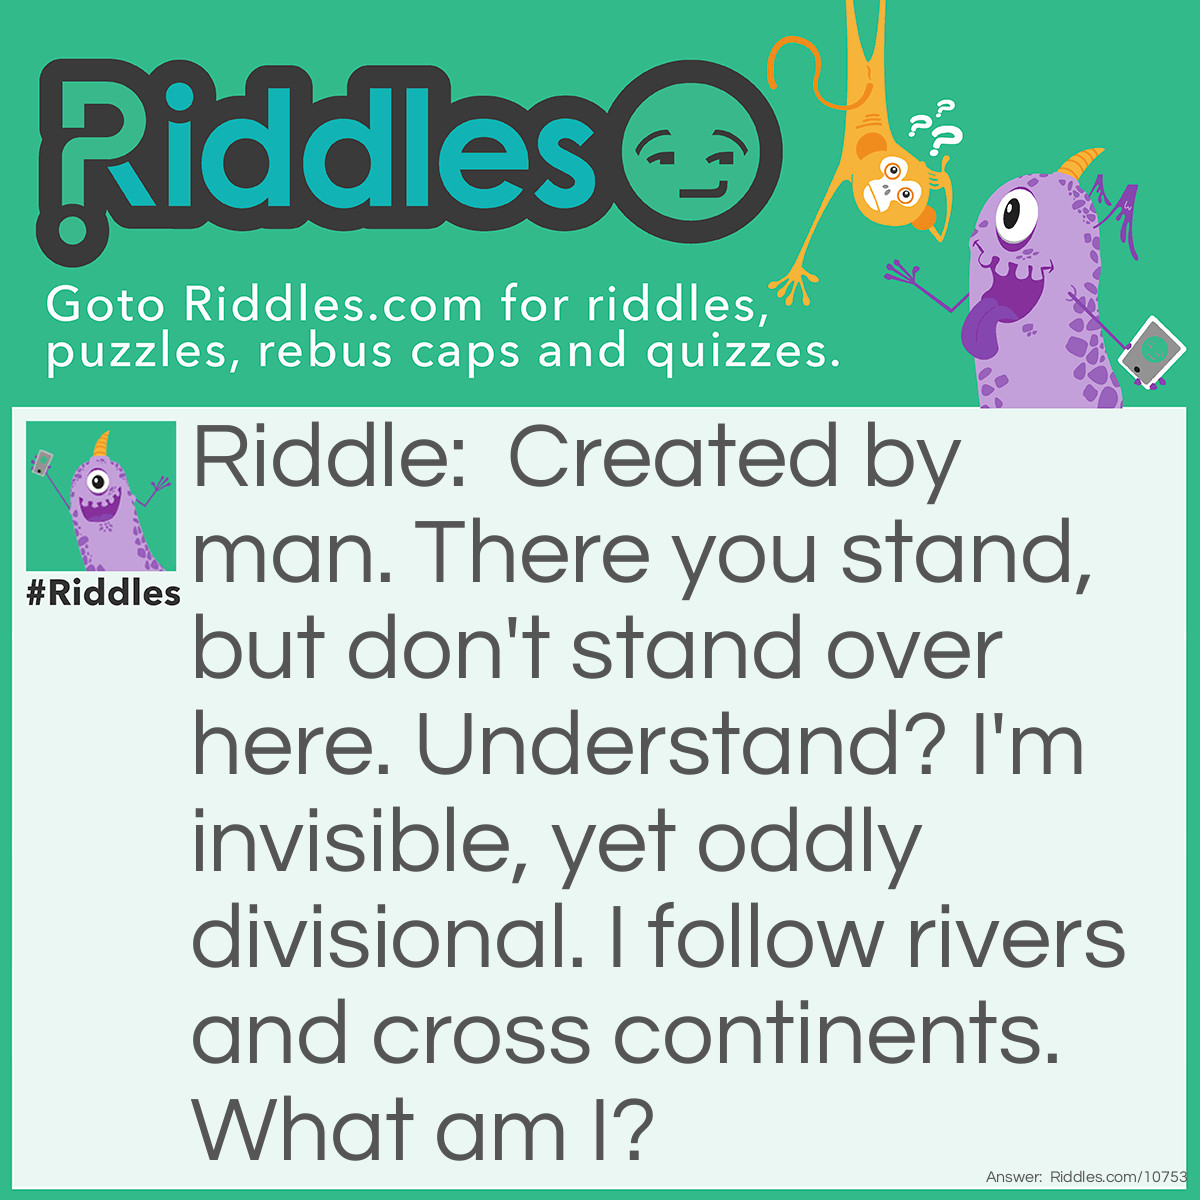 Riddle: Created by man. There you stand, but don't stand over here. Understand? I'm invisible, yet oddly divisional. I follow rivers and cross continents. What am I? Answer: Borders.